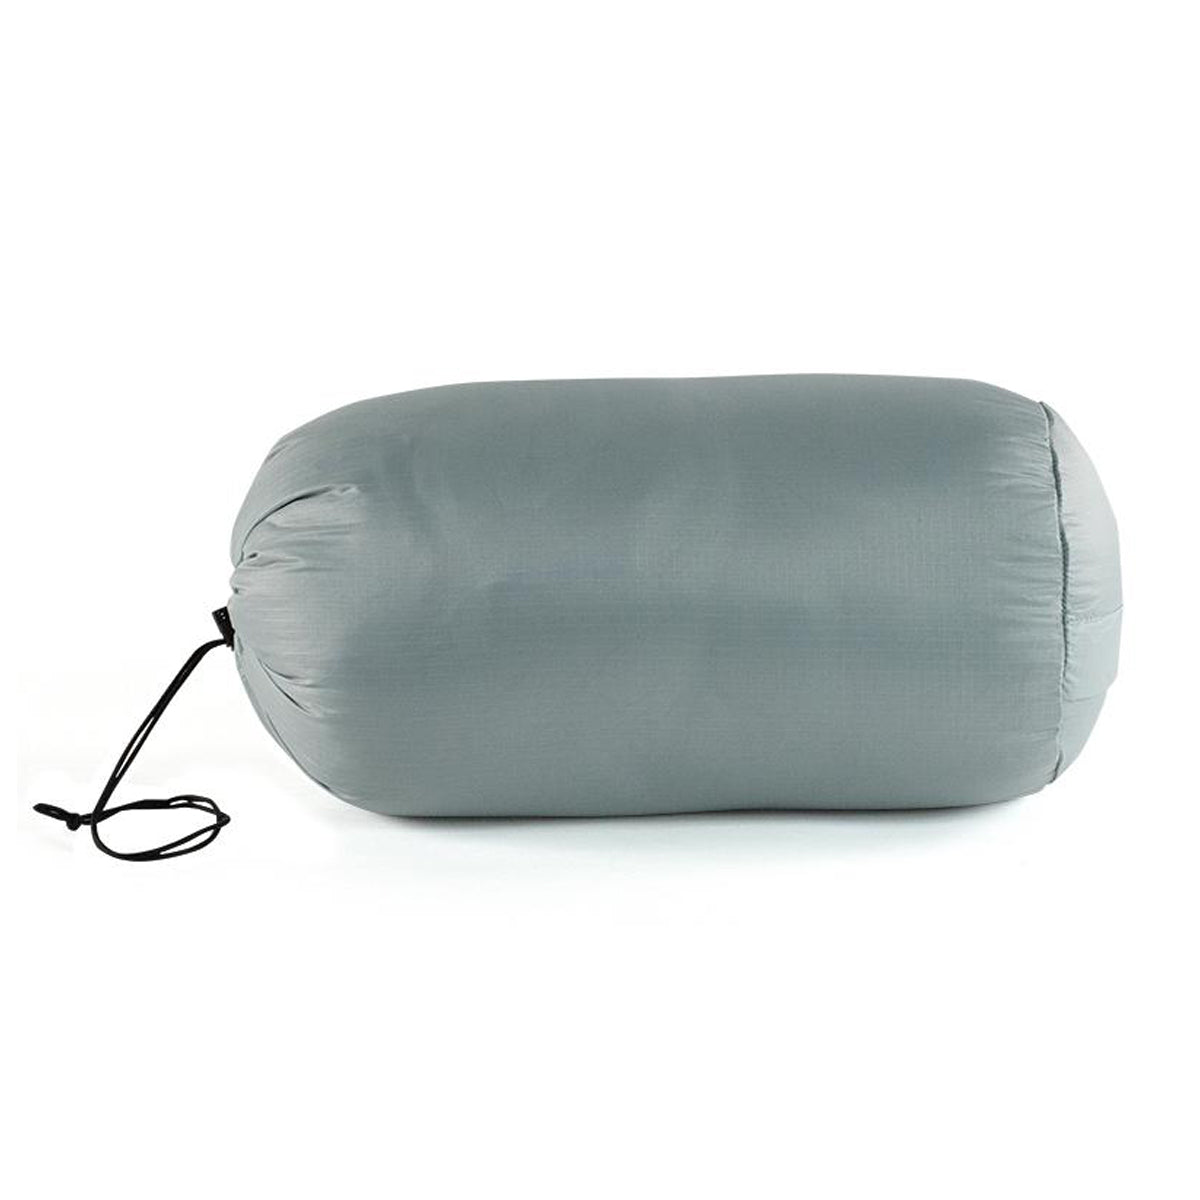 Stone Glacier Chilkoot 0° Sleeping Bag in Stone Glacier Chilkoot 0º Sleeping Bag by Stone Glacier | Camping - goHUNT Shop by GOHUNT | Stone Glacier - GOHUNT Shop